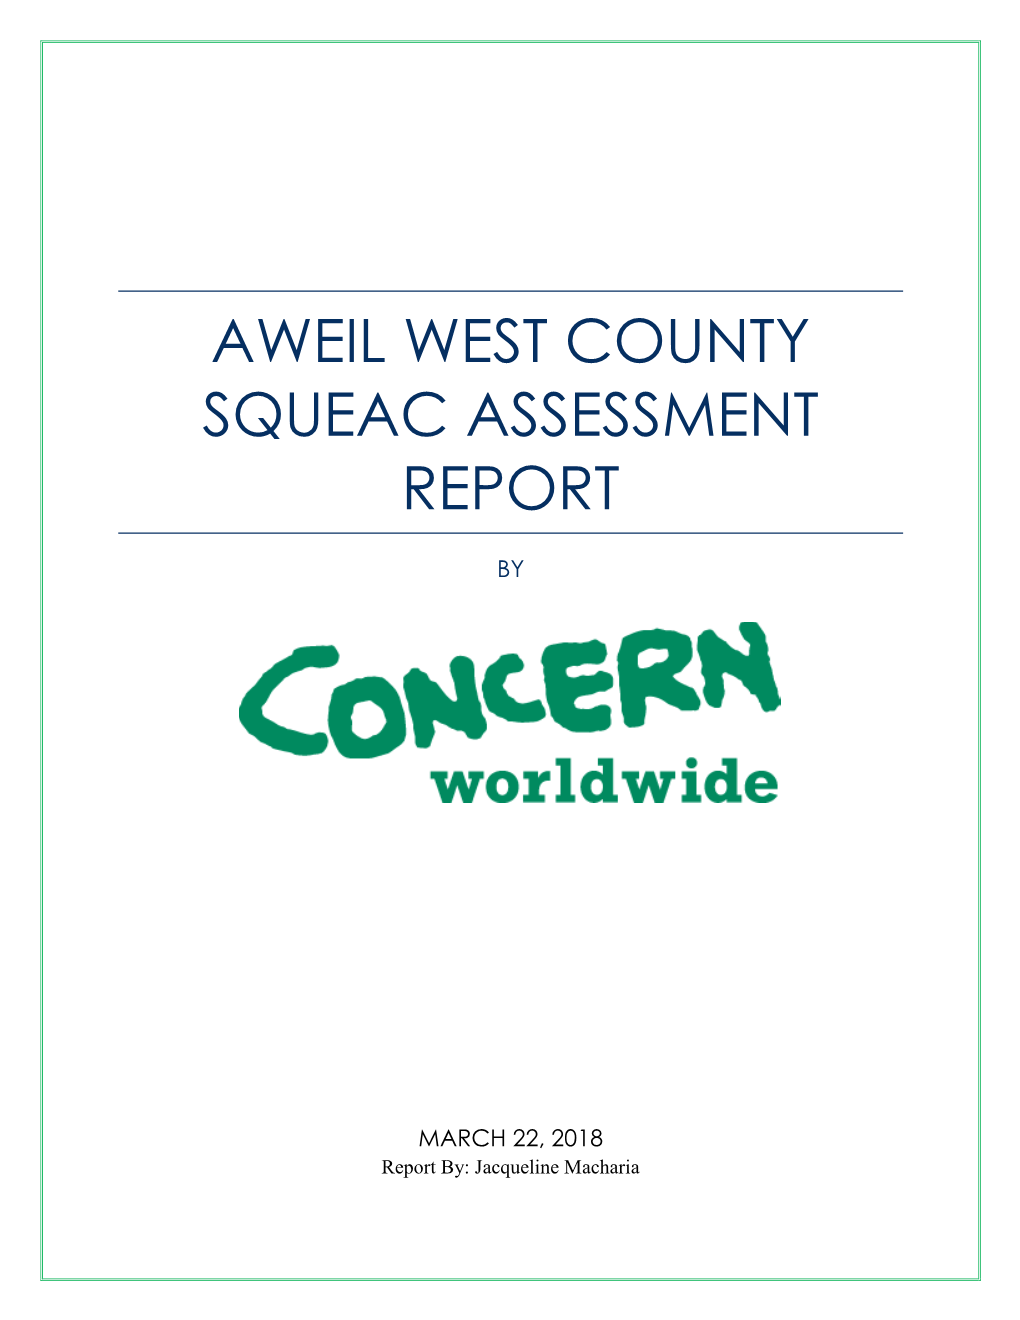 Aweil West County Squeac ASSESSMENT PRELIMINARY Report